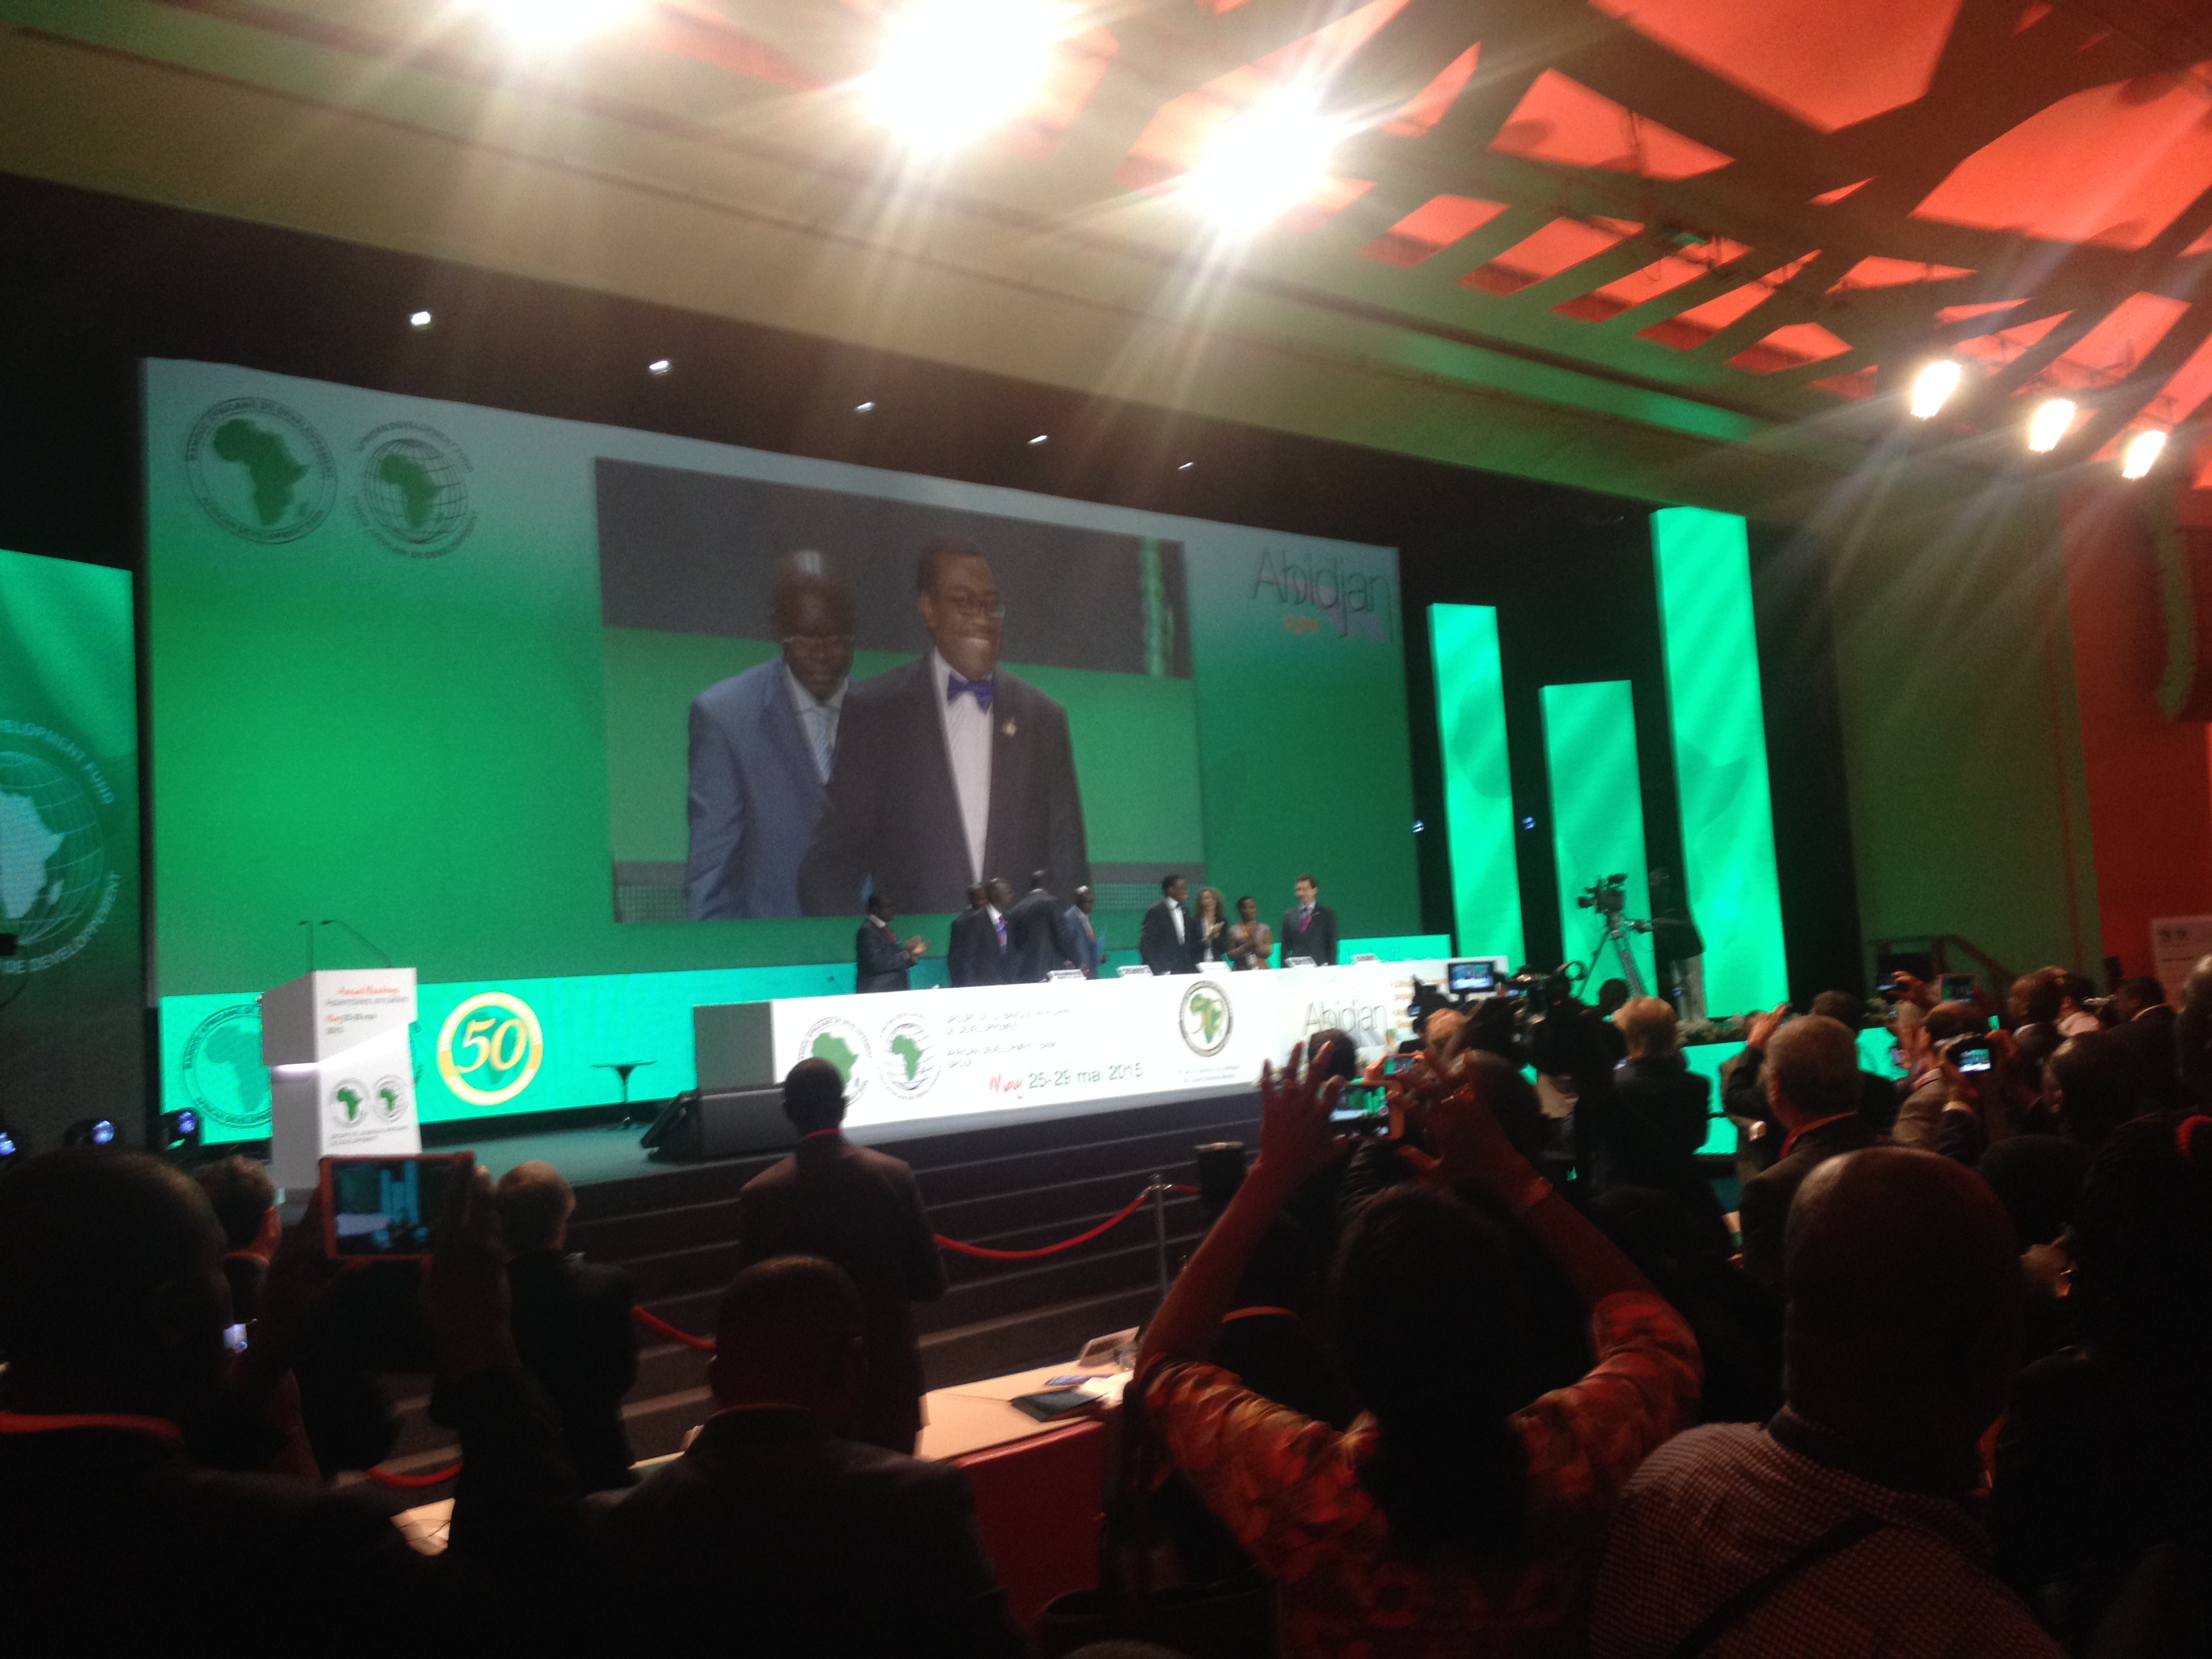 Akinwumi Adesina, Nigeria’s Minister for Agriculture and Rural Development, was elected to be the new president of the African Development Bank. at the annual meeting in Abidjan